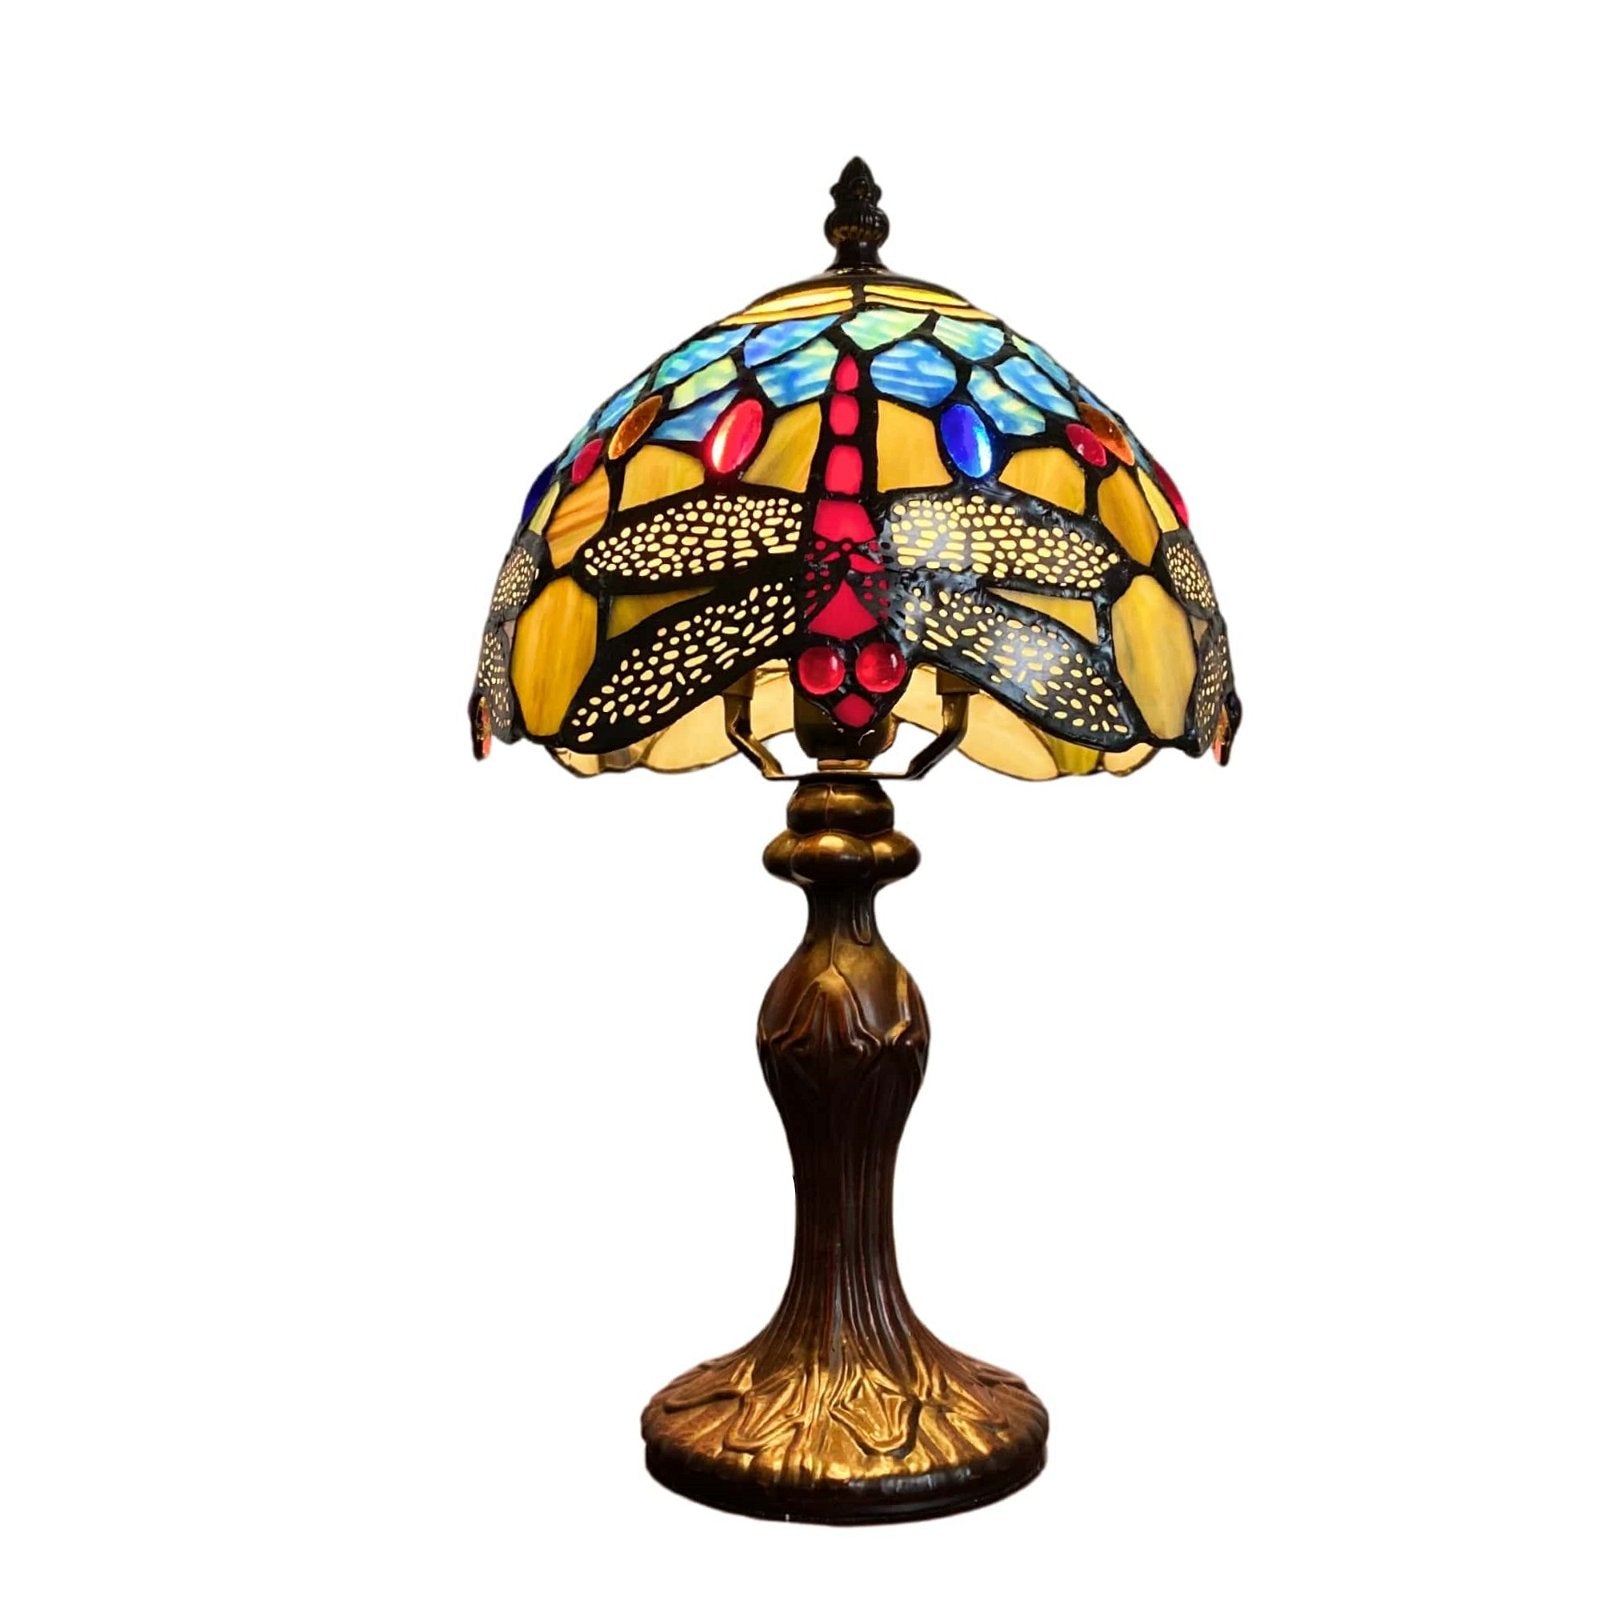 View Blue Dragonfly Tiffany Lamp information